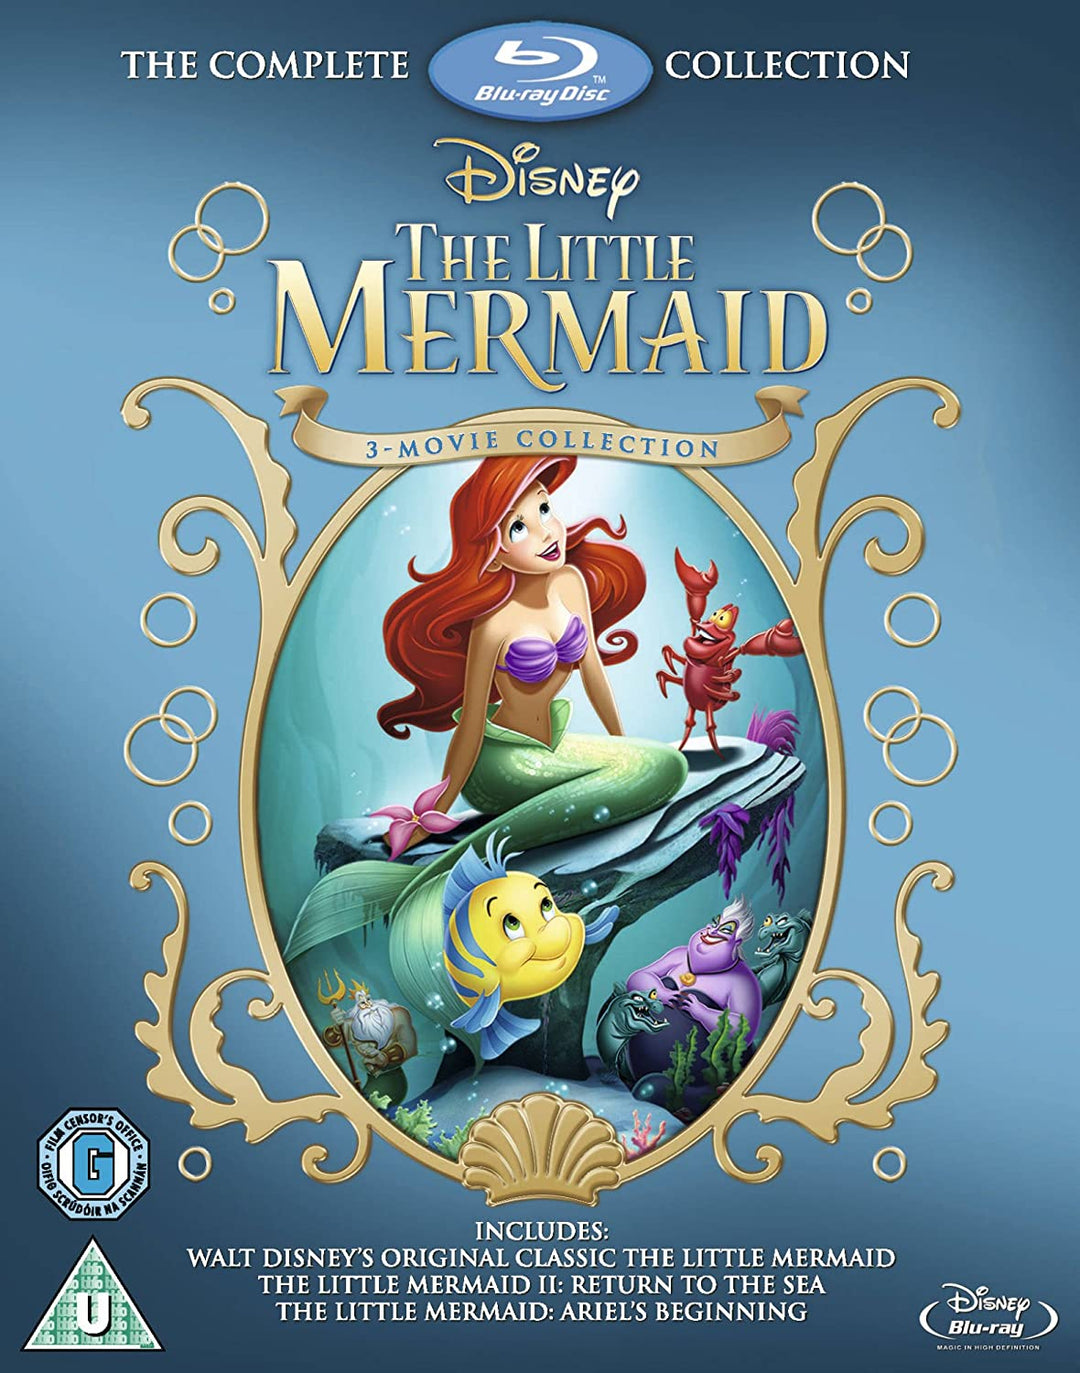 The Little Mermaid Collection [Blu-ray] [1989] [Region Free]